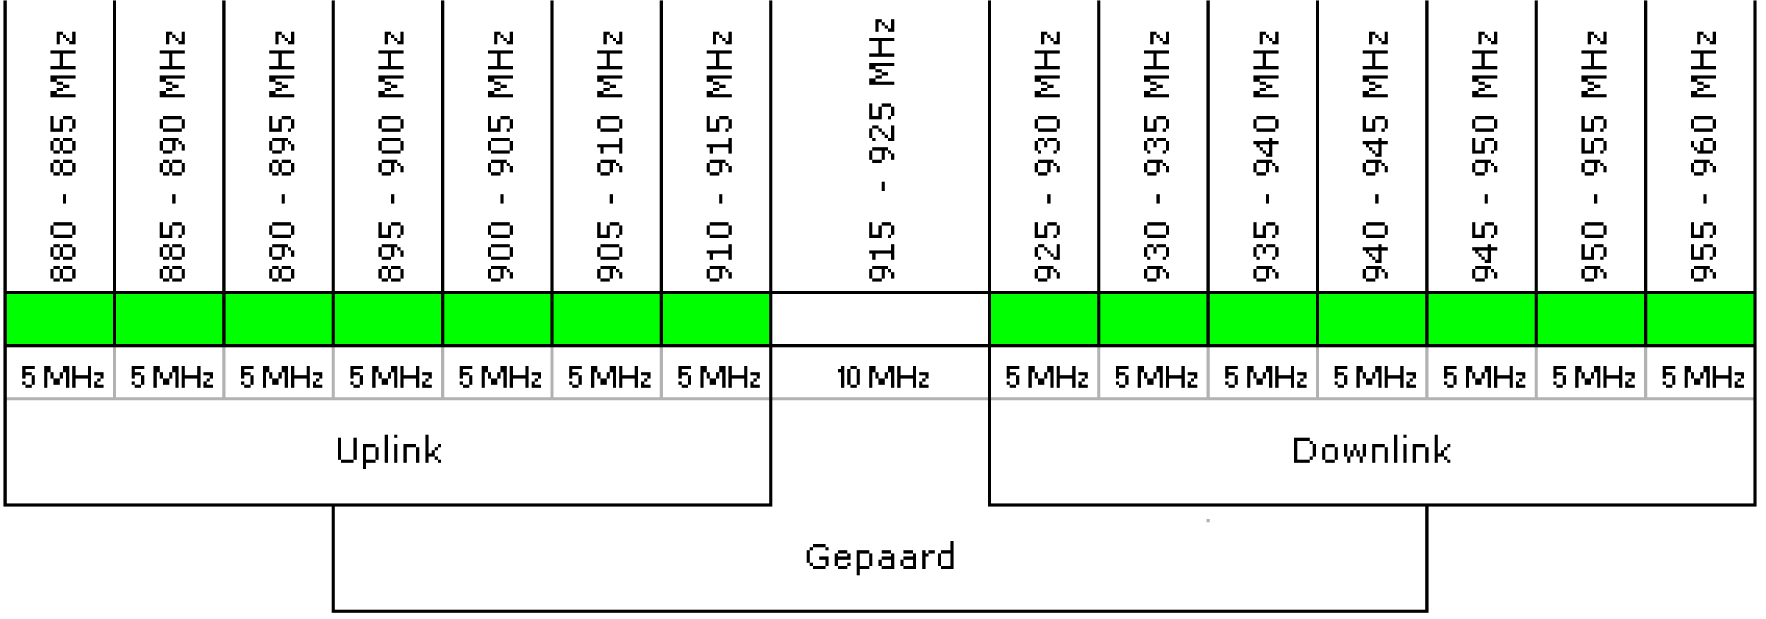 Tabel 3: 900 MHz band